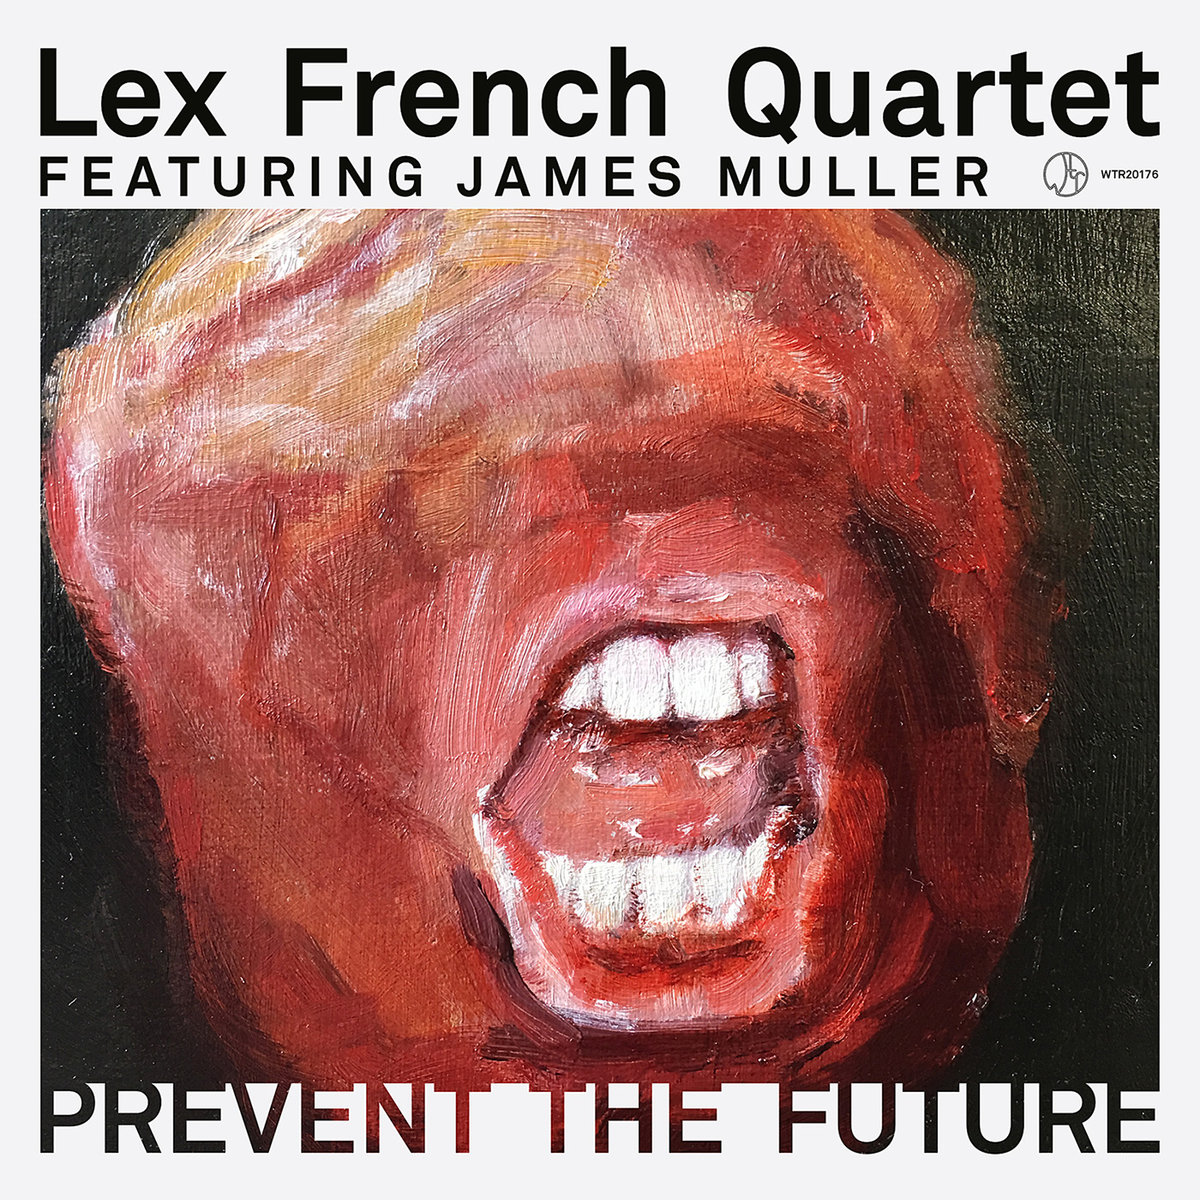 Lex French Quartet featuring James Muller – “Prevent the Future” [Recorded & Mixed (JB), Produced (AP), Mastered (JP), WTR]